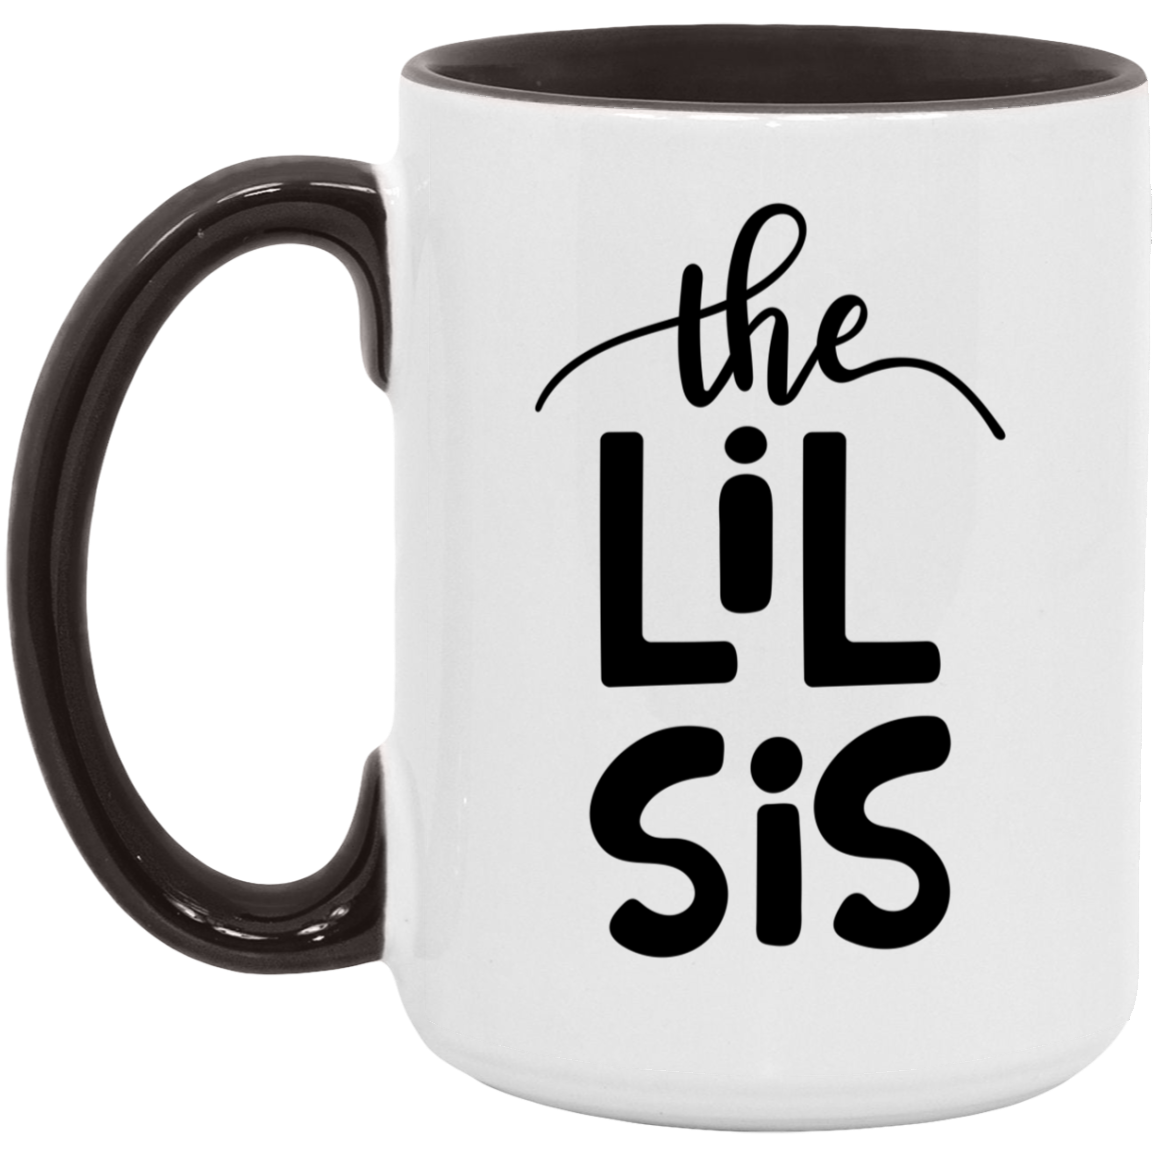 Lil Sis Mug 15 oz. | Gift To Little Sister From Bother or Sister